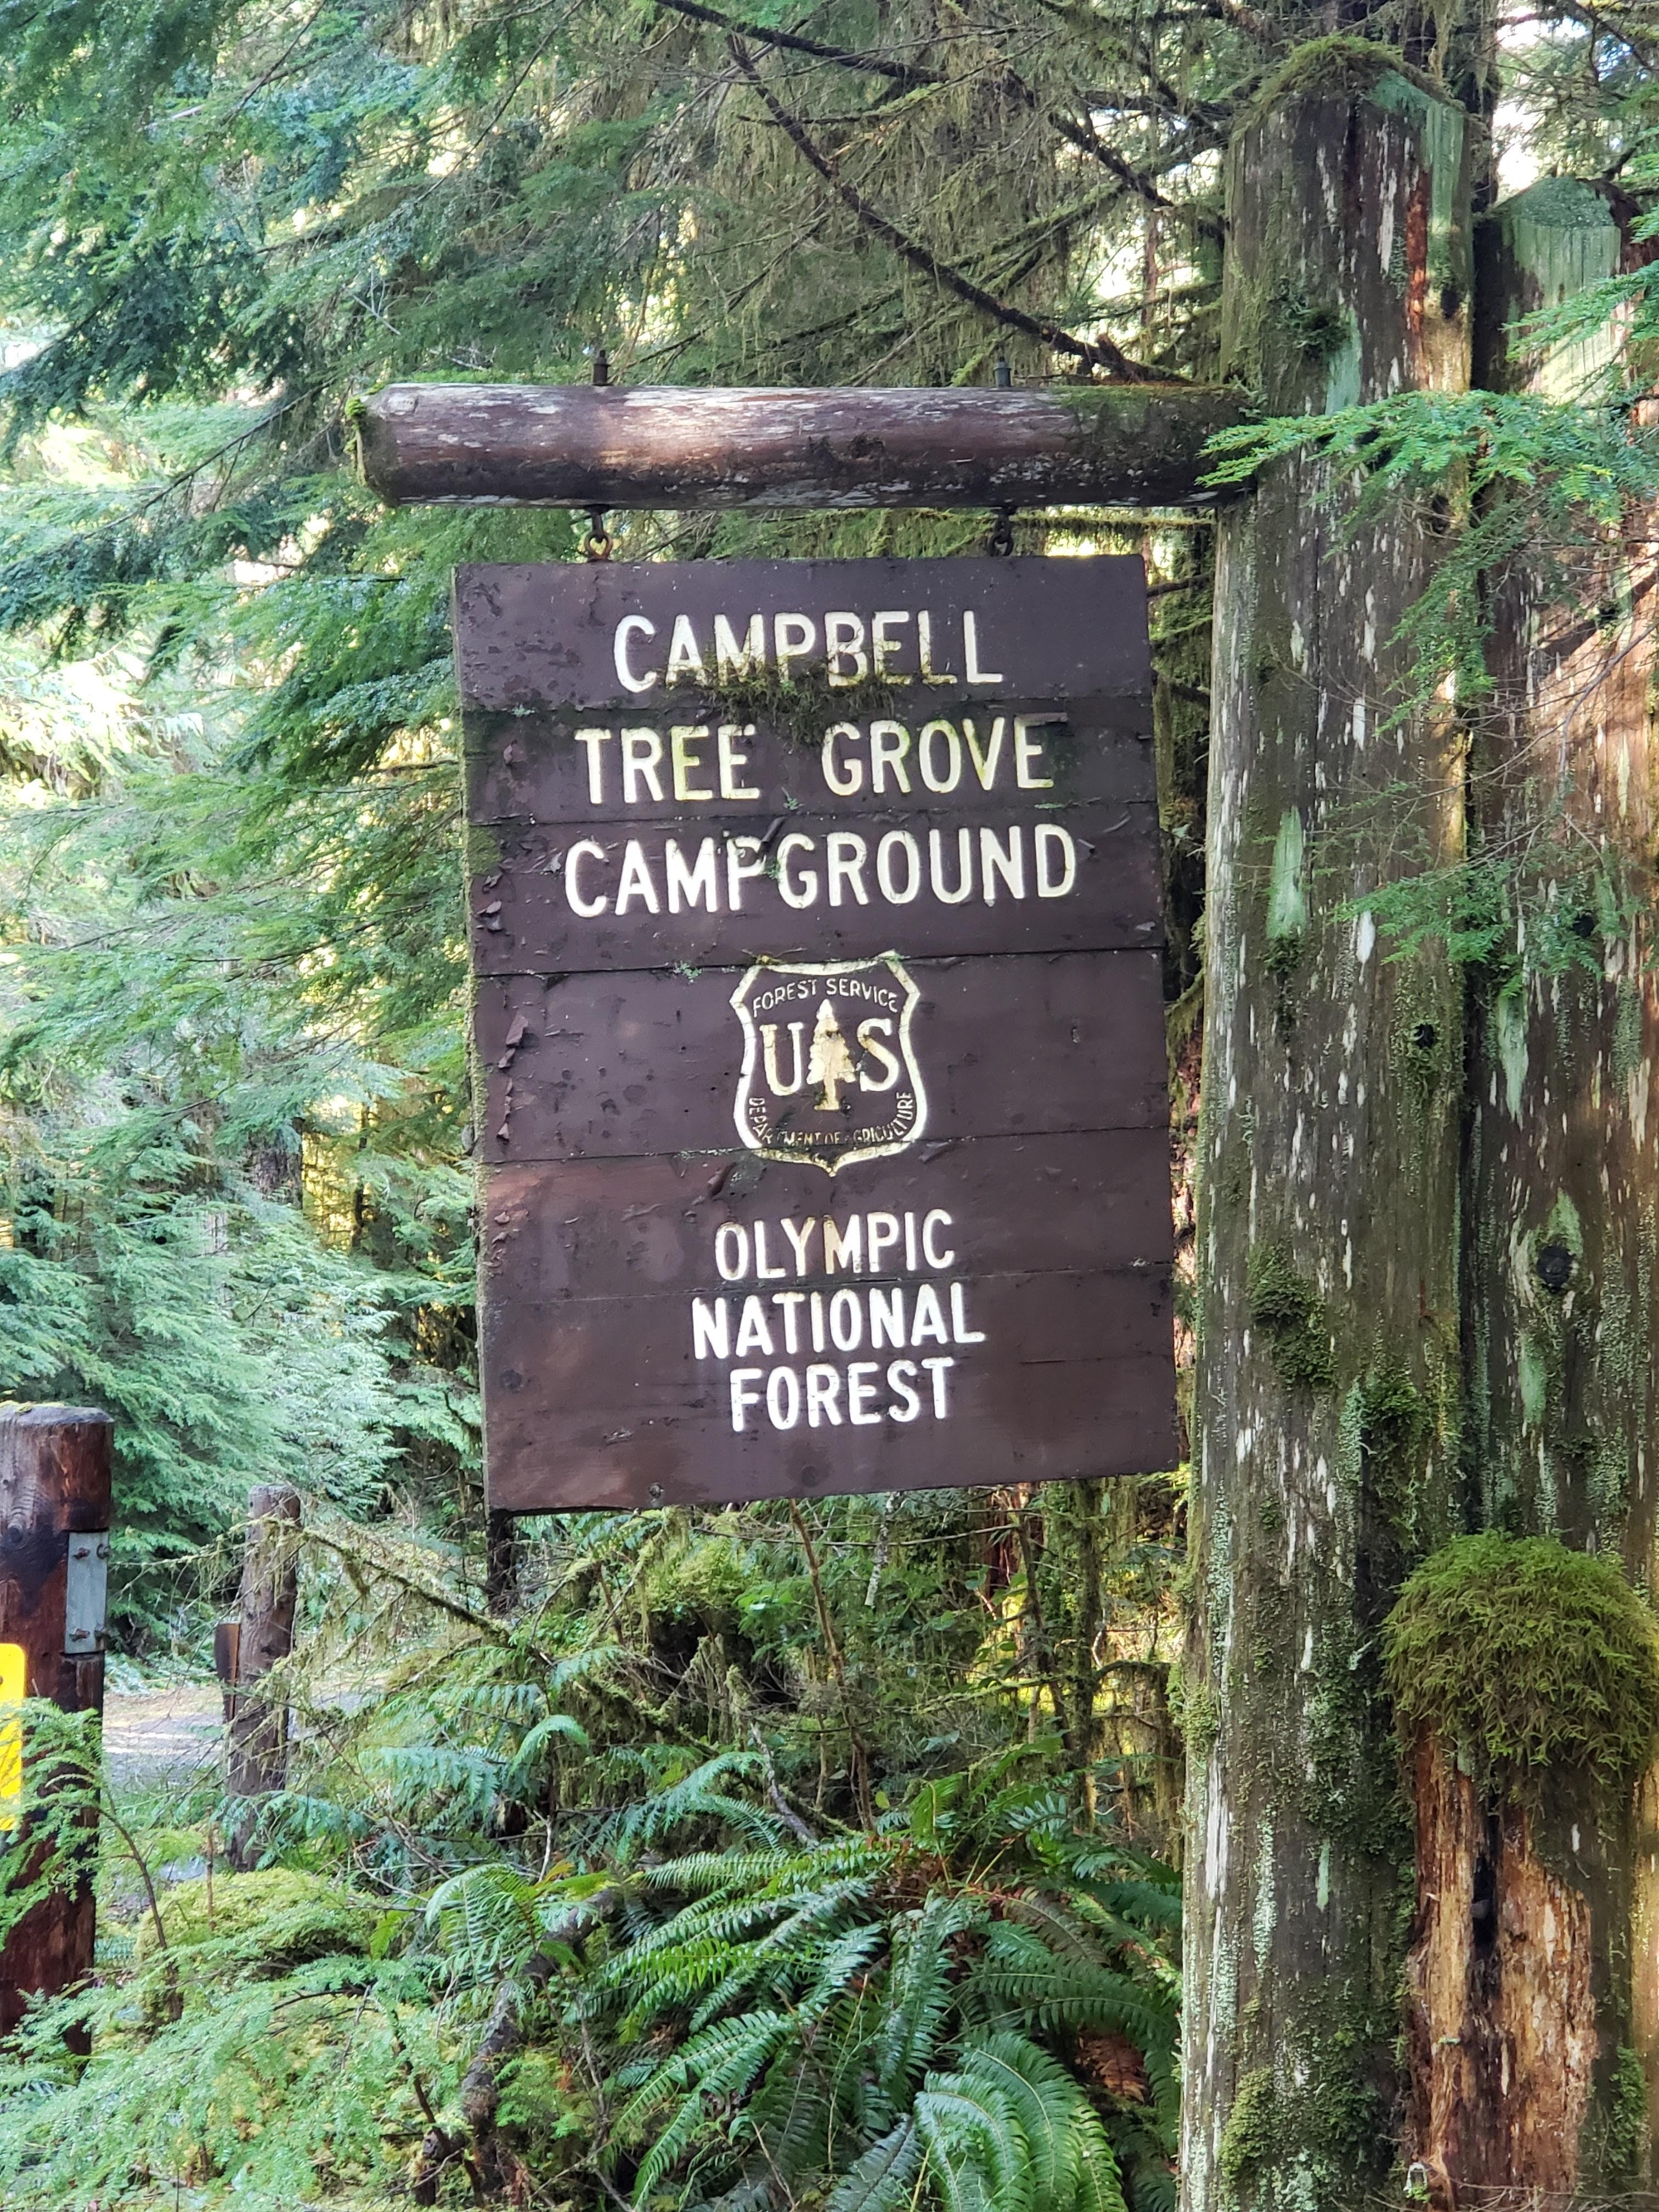 Camper submitted image from Campbell Tree Grove Campground - 5